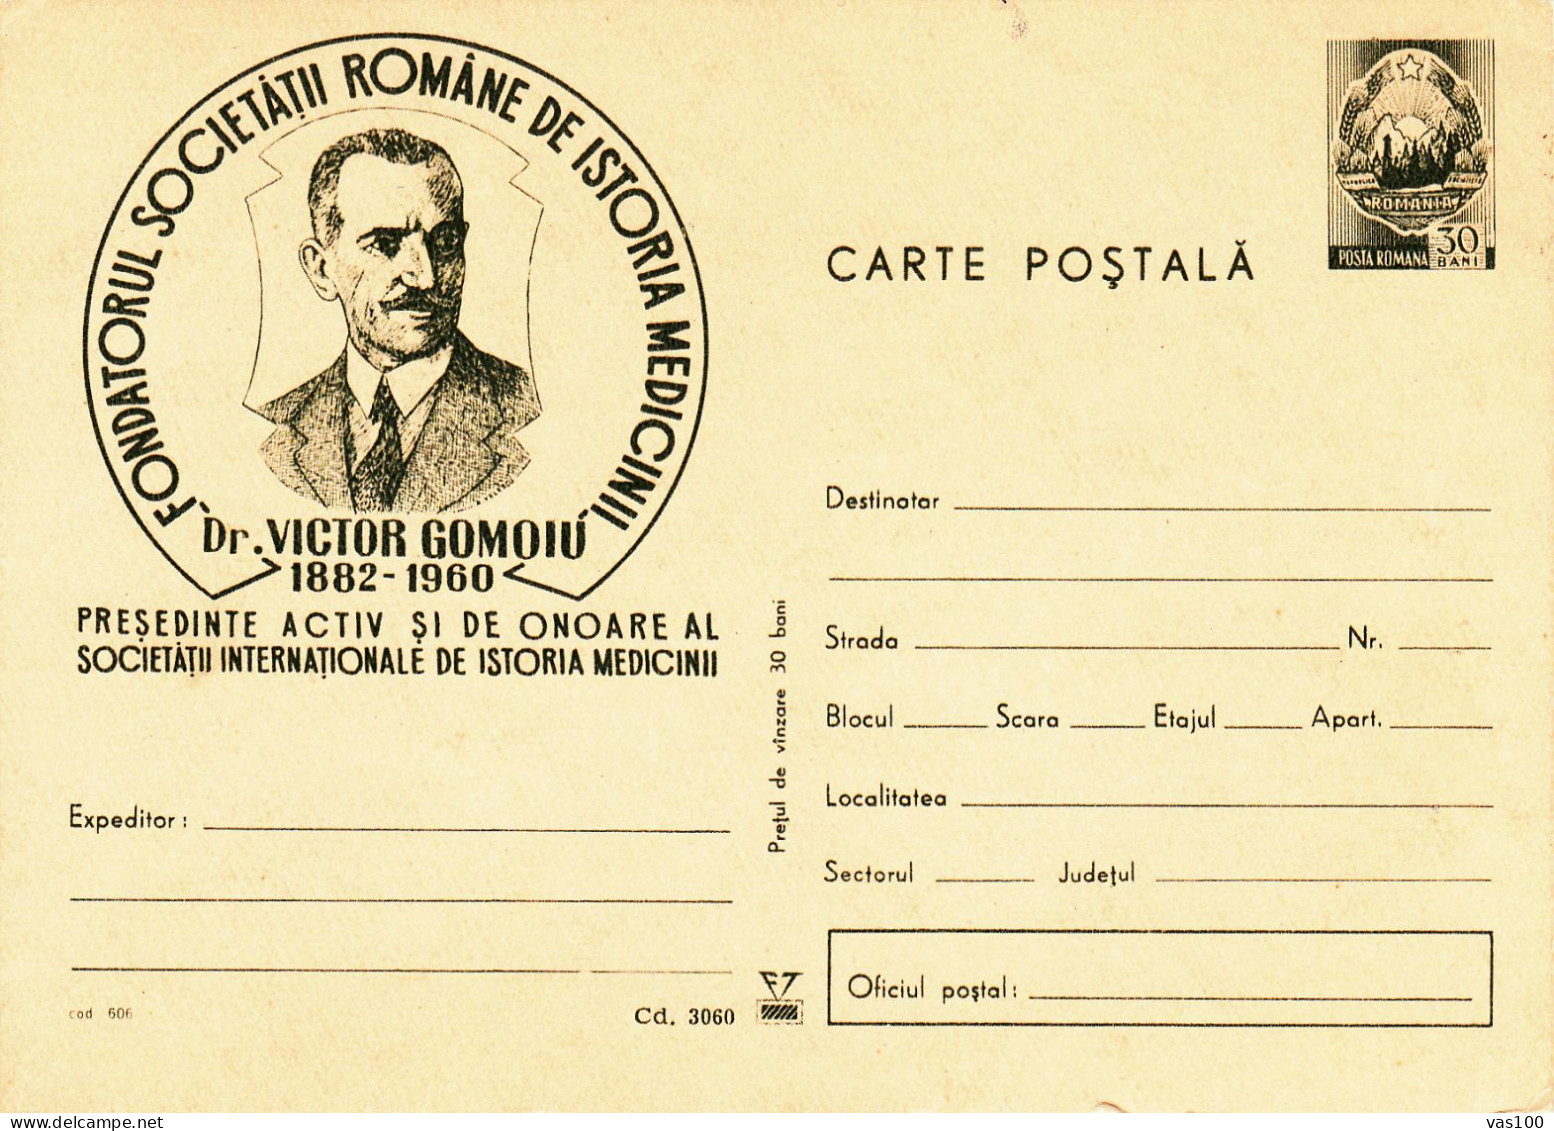 THE HISTORY OF MEDICINE, THE FOUNDER OF THE SOCIETY, VICTOR GOMOIU 1882-1960, POSTCARD STATIONERY UNUSED,ROMANIA. - Covers & Documents